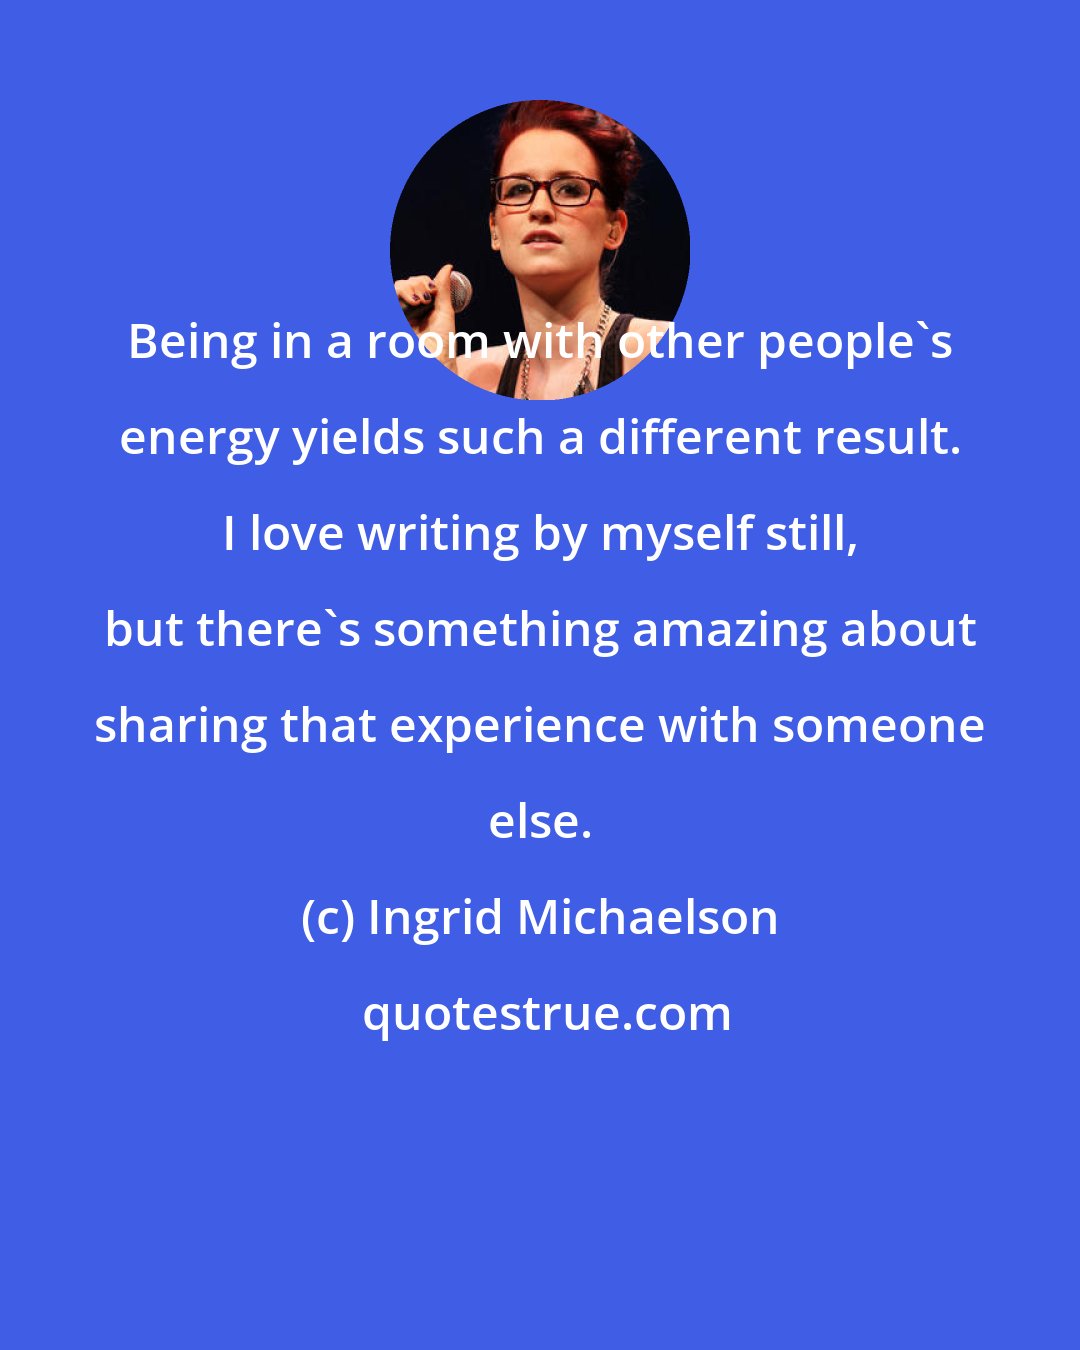 Ingrid Michaelson: Being in a room with other people's energy yields such a different result. I love writing by myself still, but there's something amazing about sharing that experience with someone else.